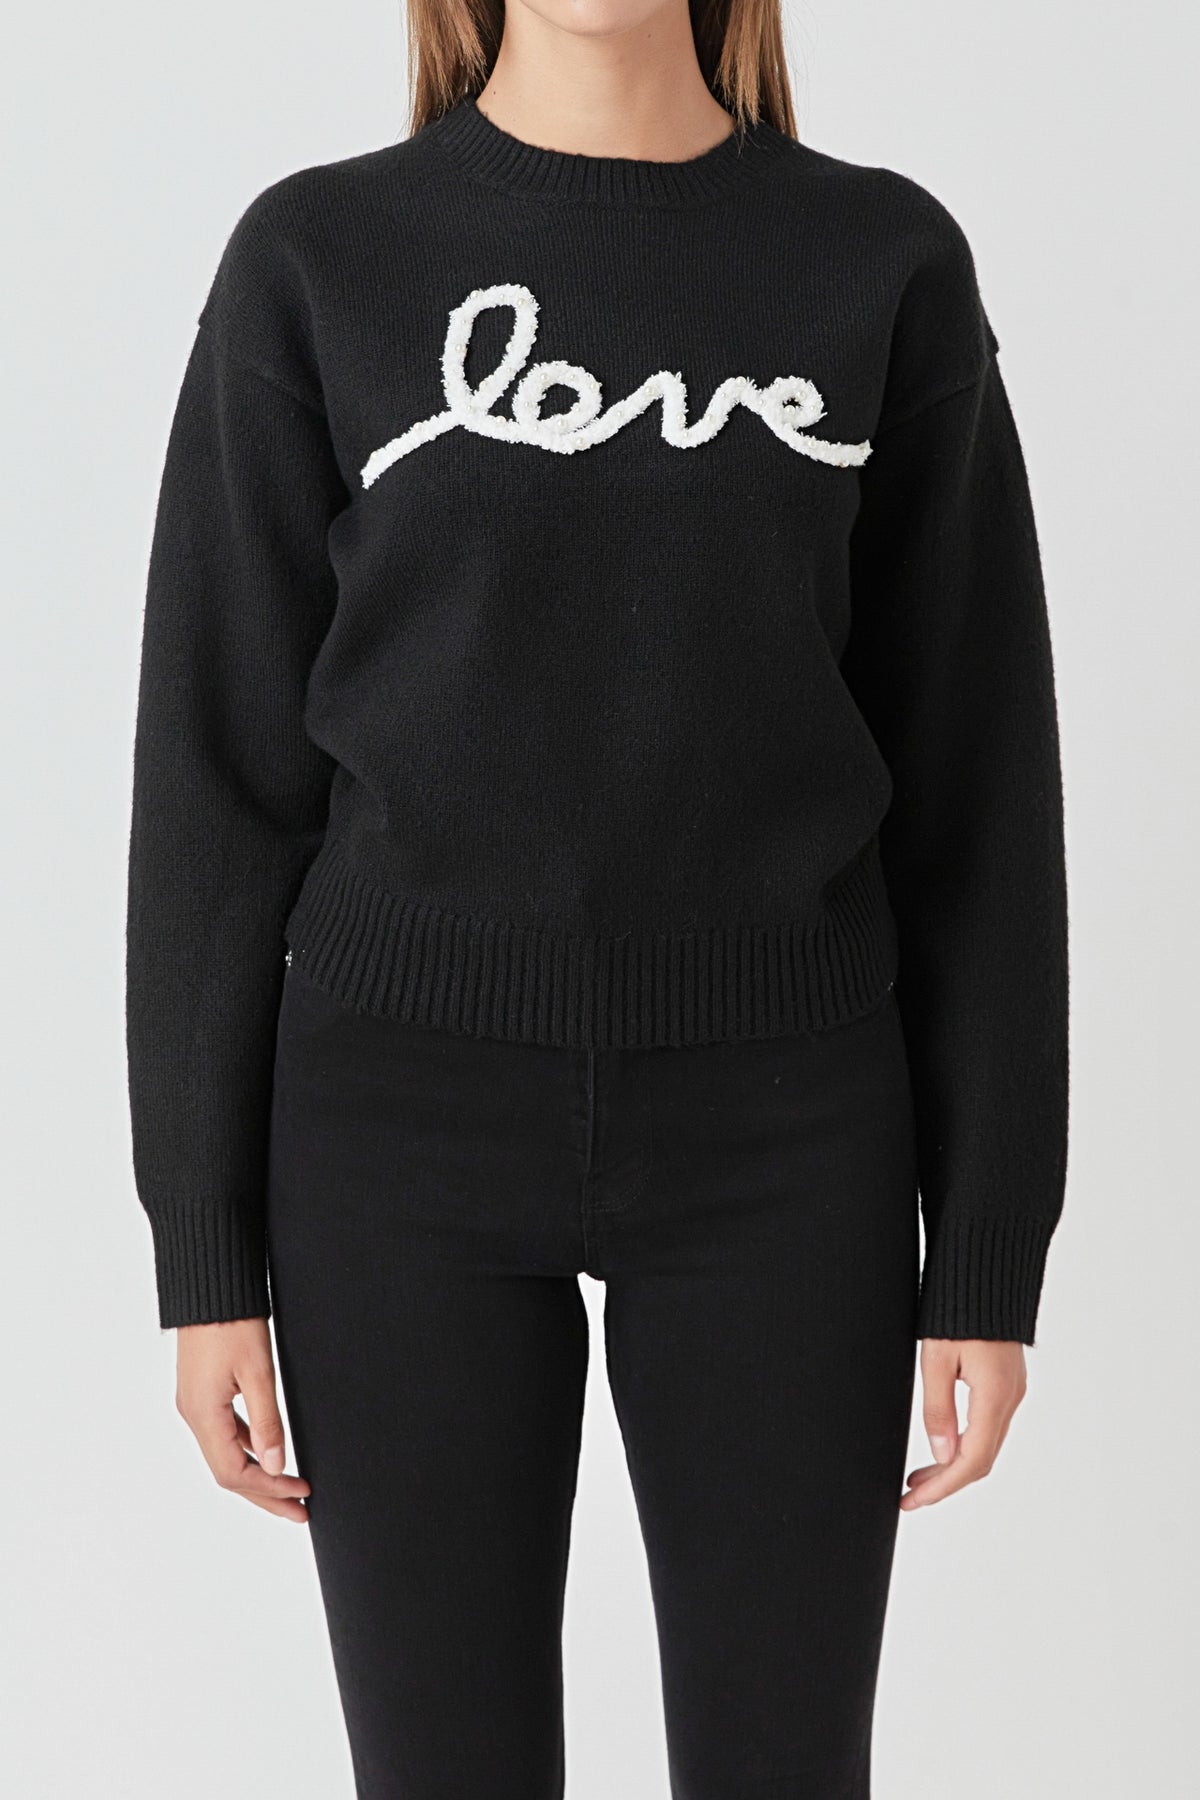 ENDLESS ROSE - Pearl Love Sweater - SWEATERS & KNITS available at Objectrare